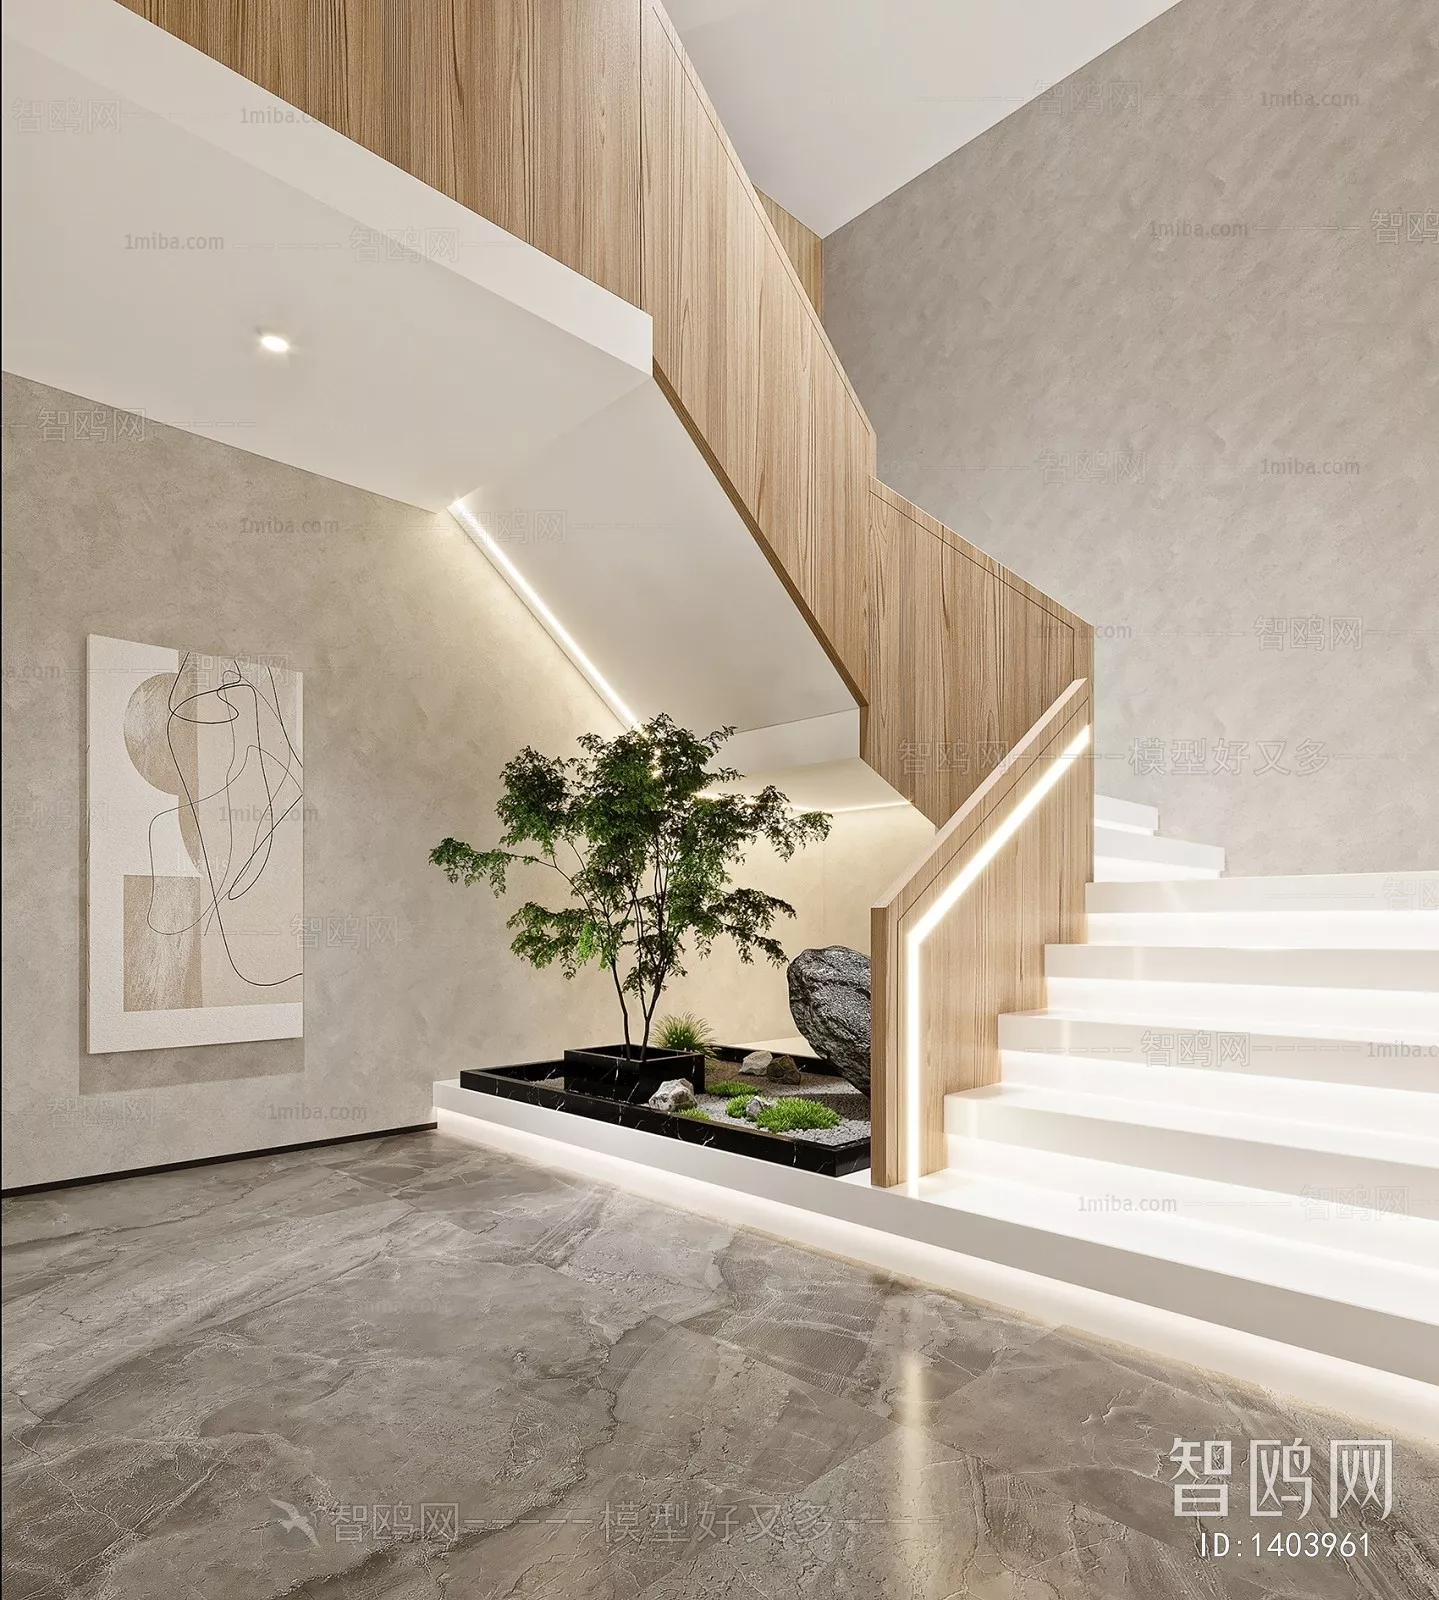 MODERN STAIR - SKETCHUP 3D MODEL - VRAY OR ENSCAPE - ID14224